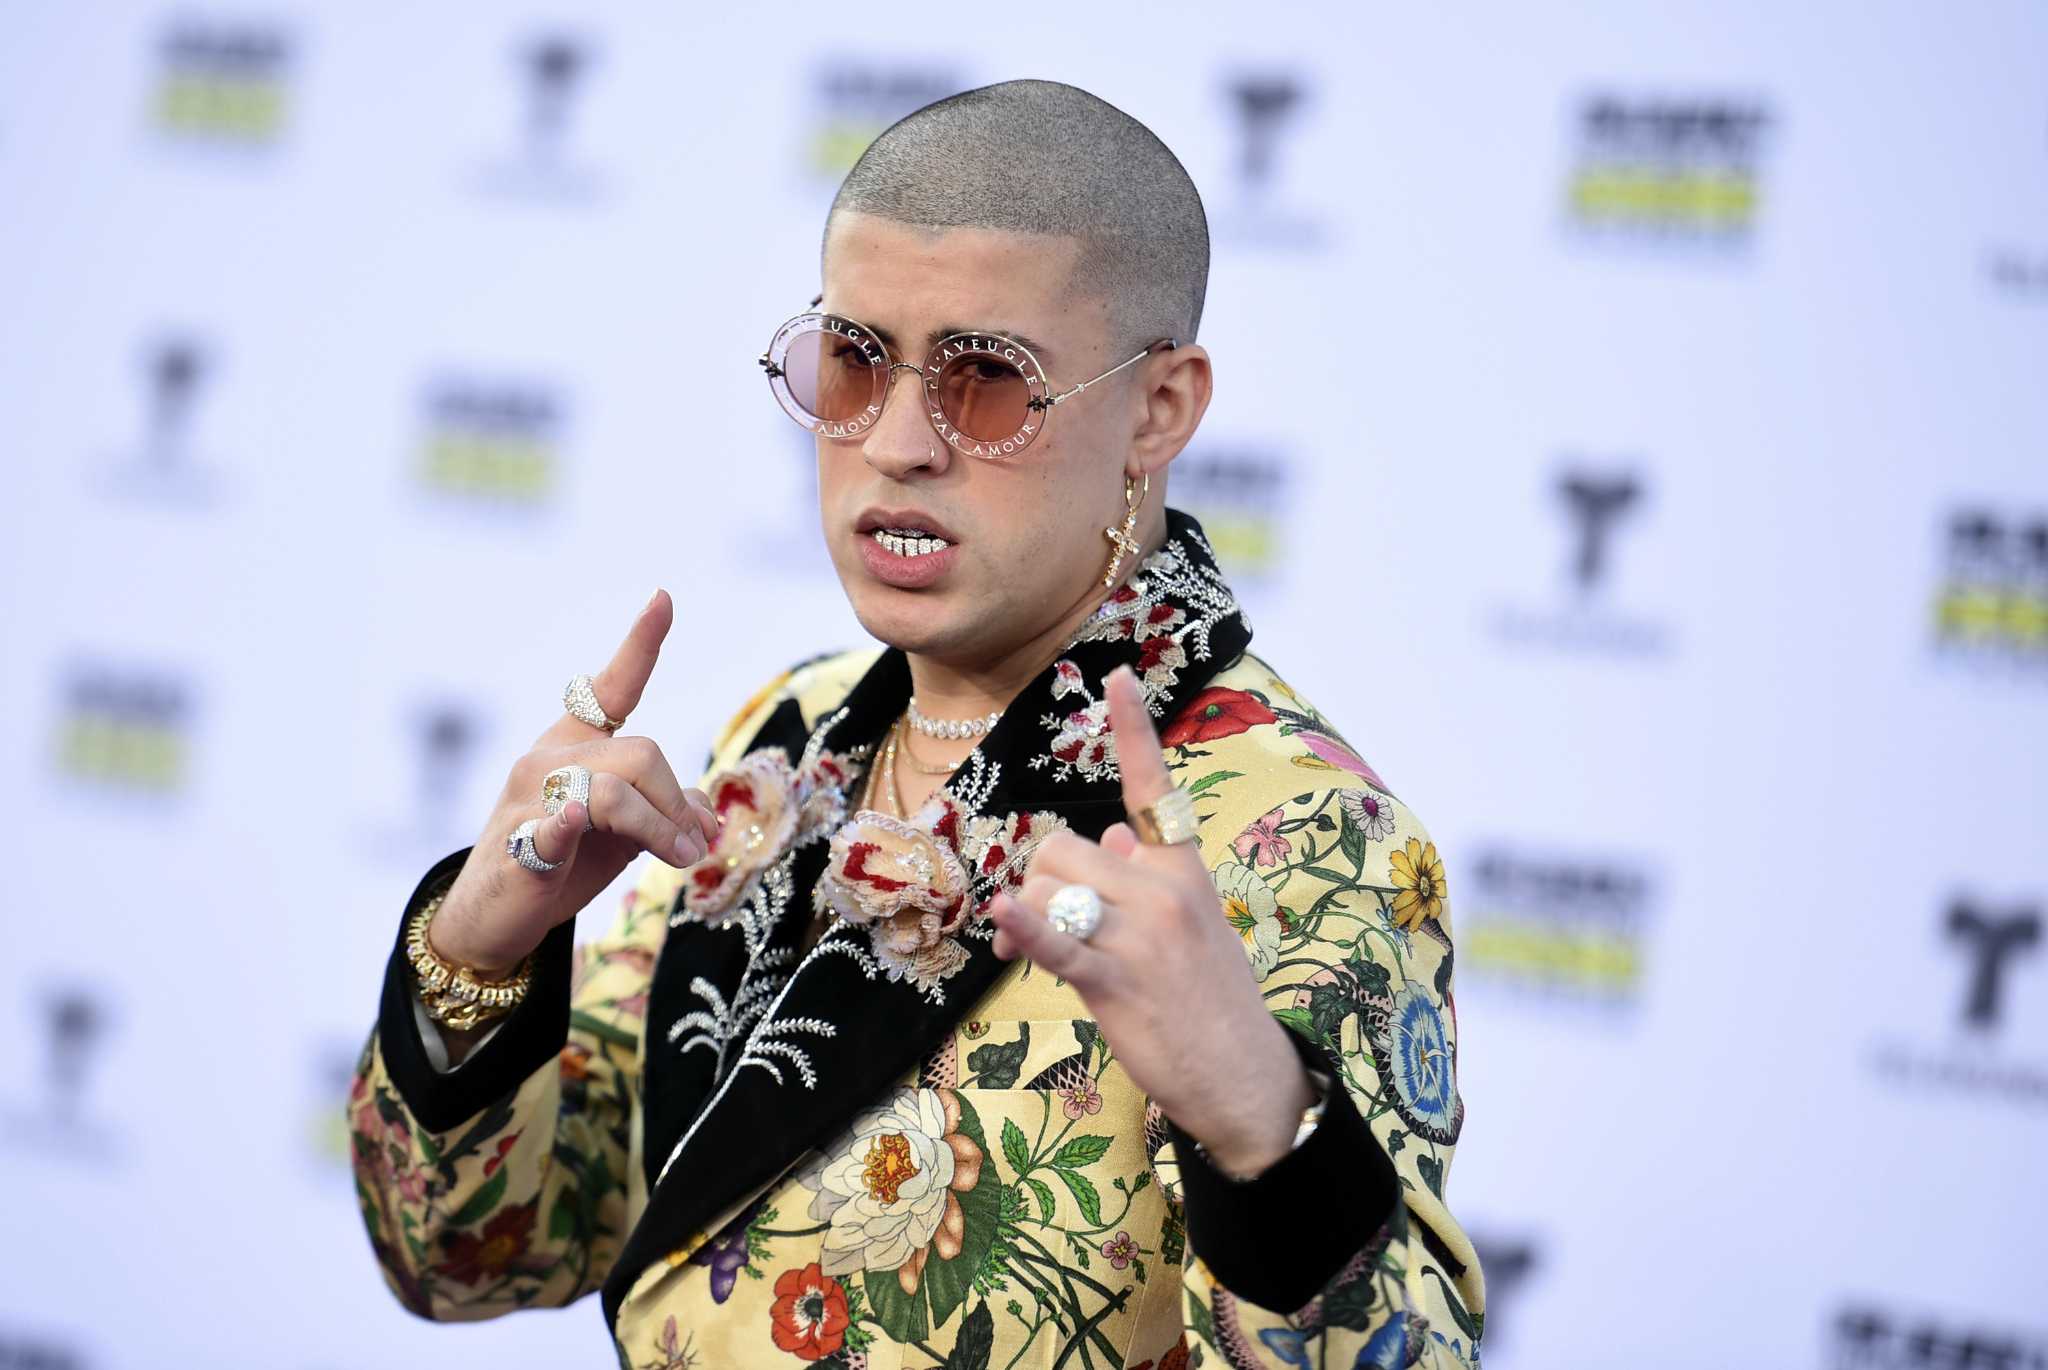 Meet Bad Bunny, the rapper who helped pump up the Astros for the World